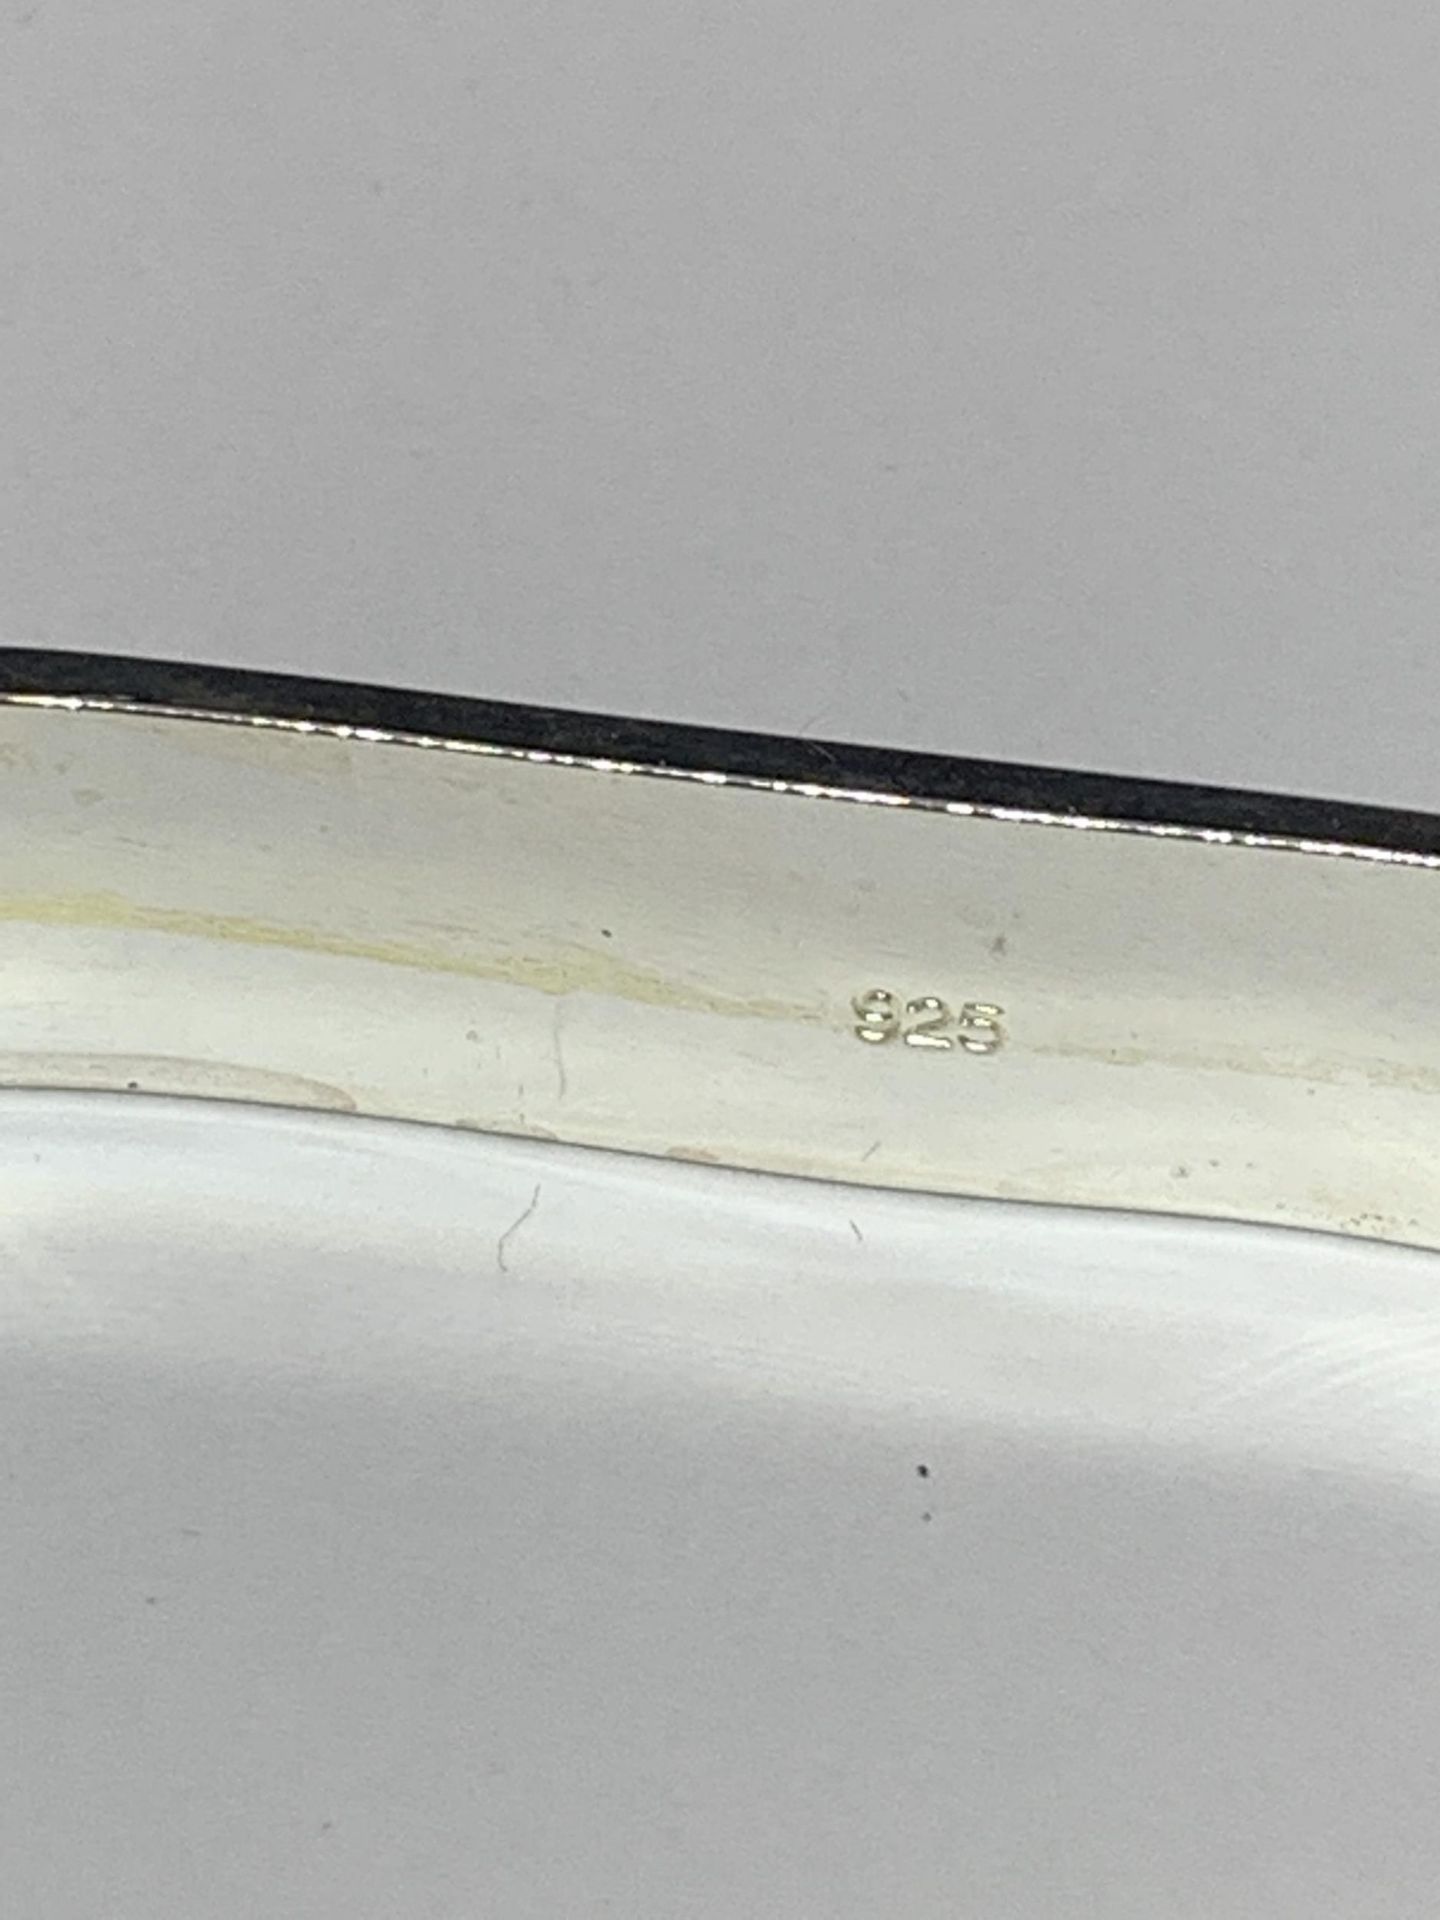 A MARKED 925 SILVER SQUARE BANGLE - Image 3 of 3